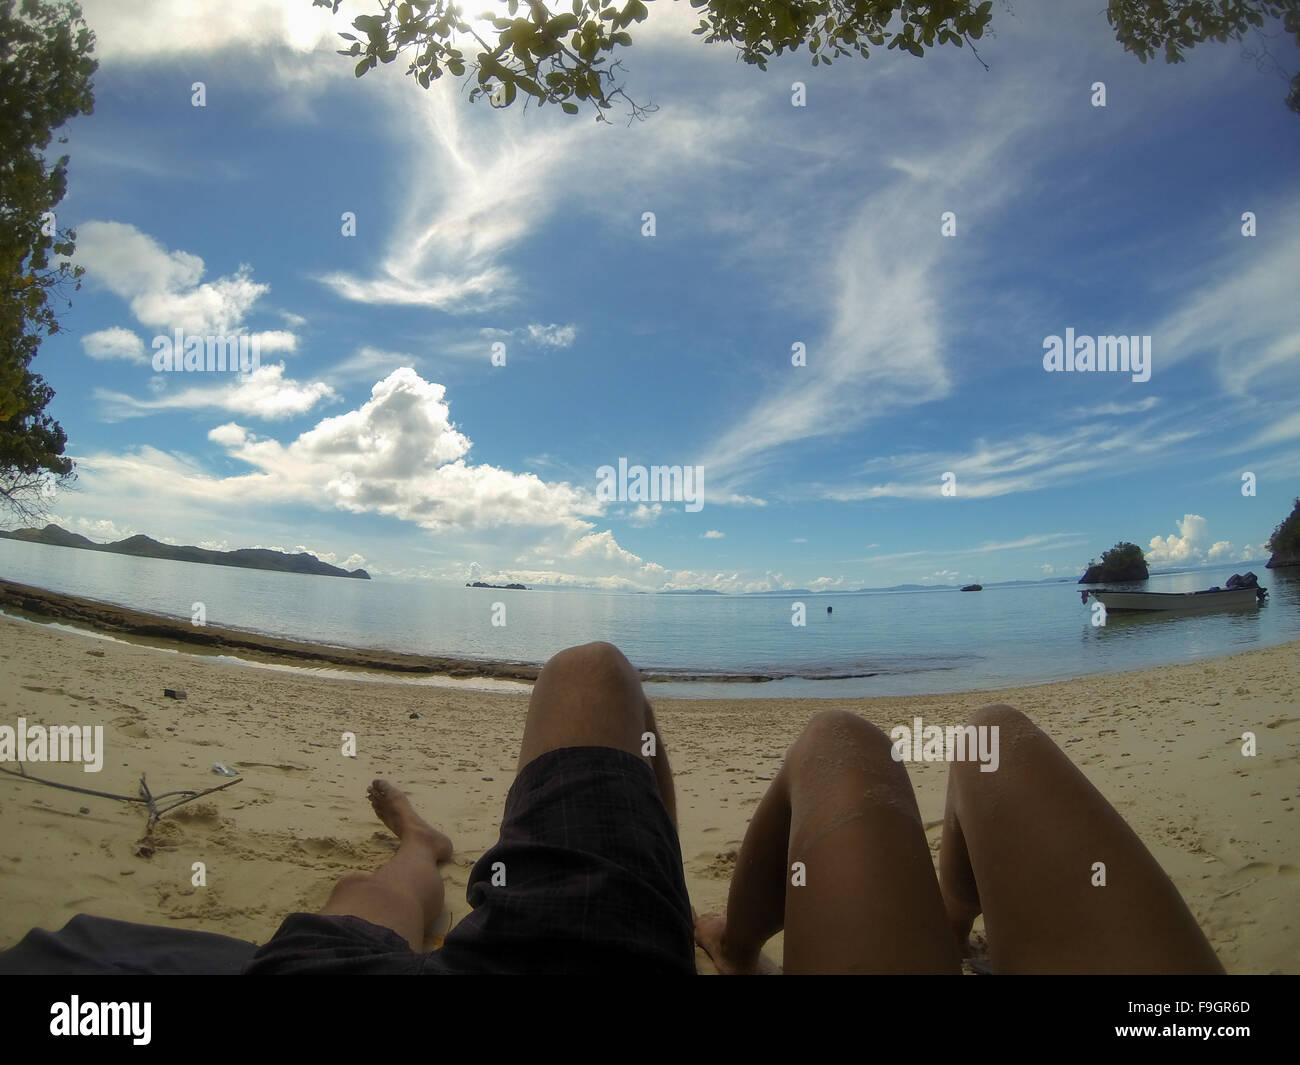 Feet of two person laying on sand beach under blue sky relaxing in Raja Ampat, Papua New Guinea Stock Photo